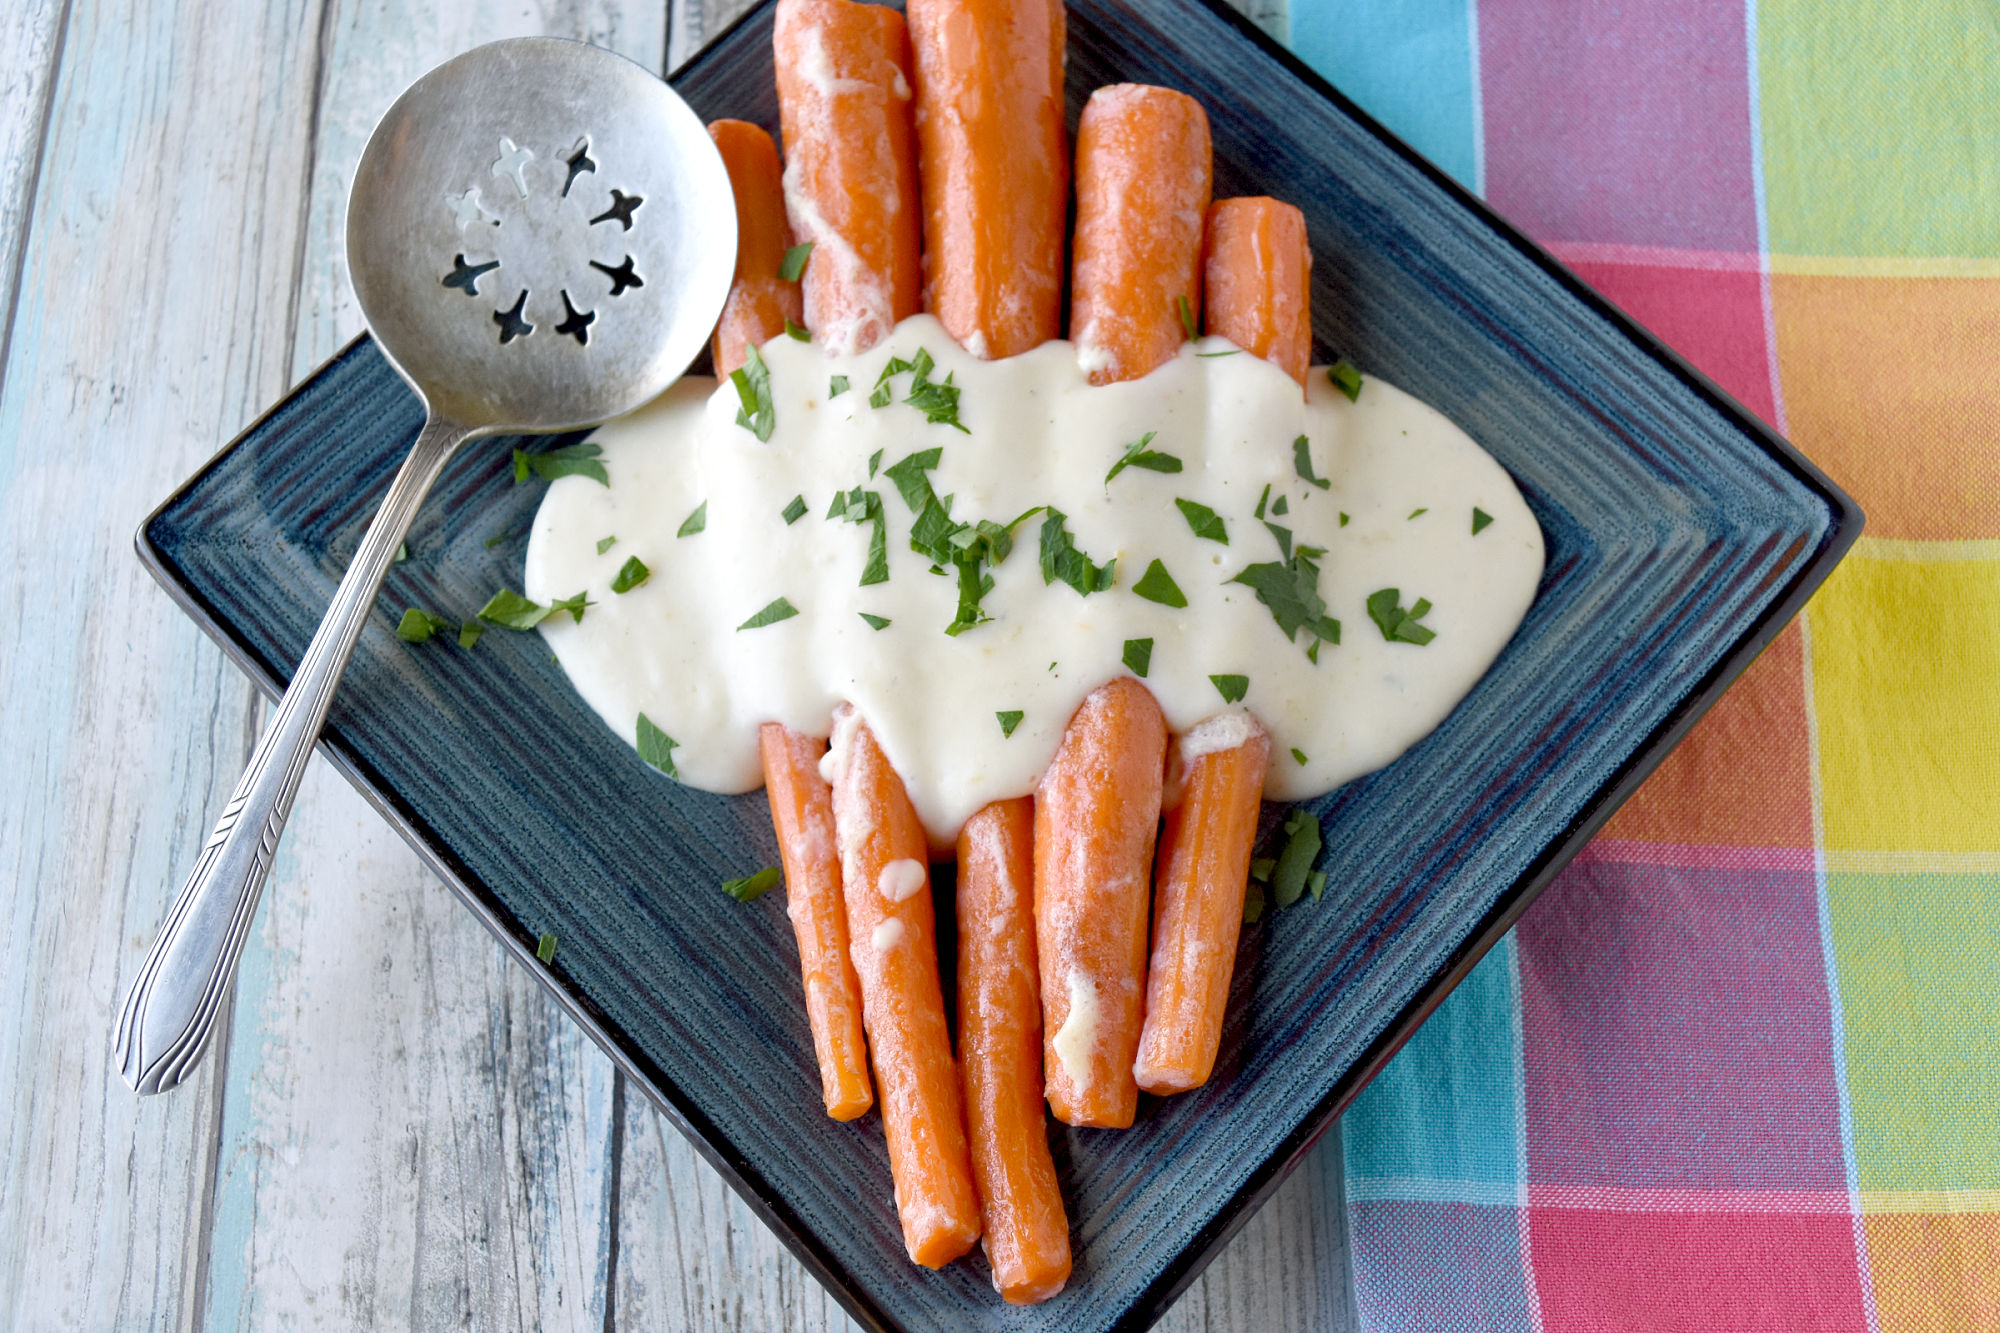 Irish Buttered Carrots, also called (Slieve Na Mbam) is a simple dish that tastes delicious. Simmered in milk and butter, they’re sweet, butter, and packed with flavor.  #OurFamilyTable #easyrecipe #carrotrecipe #Irishrecipe